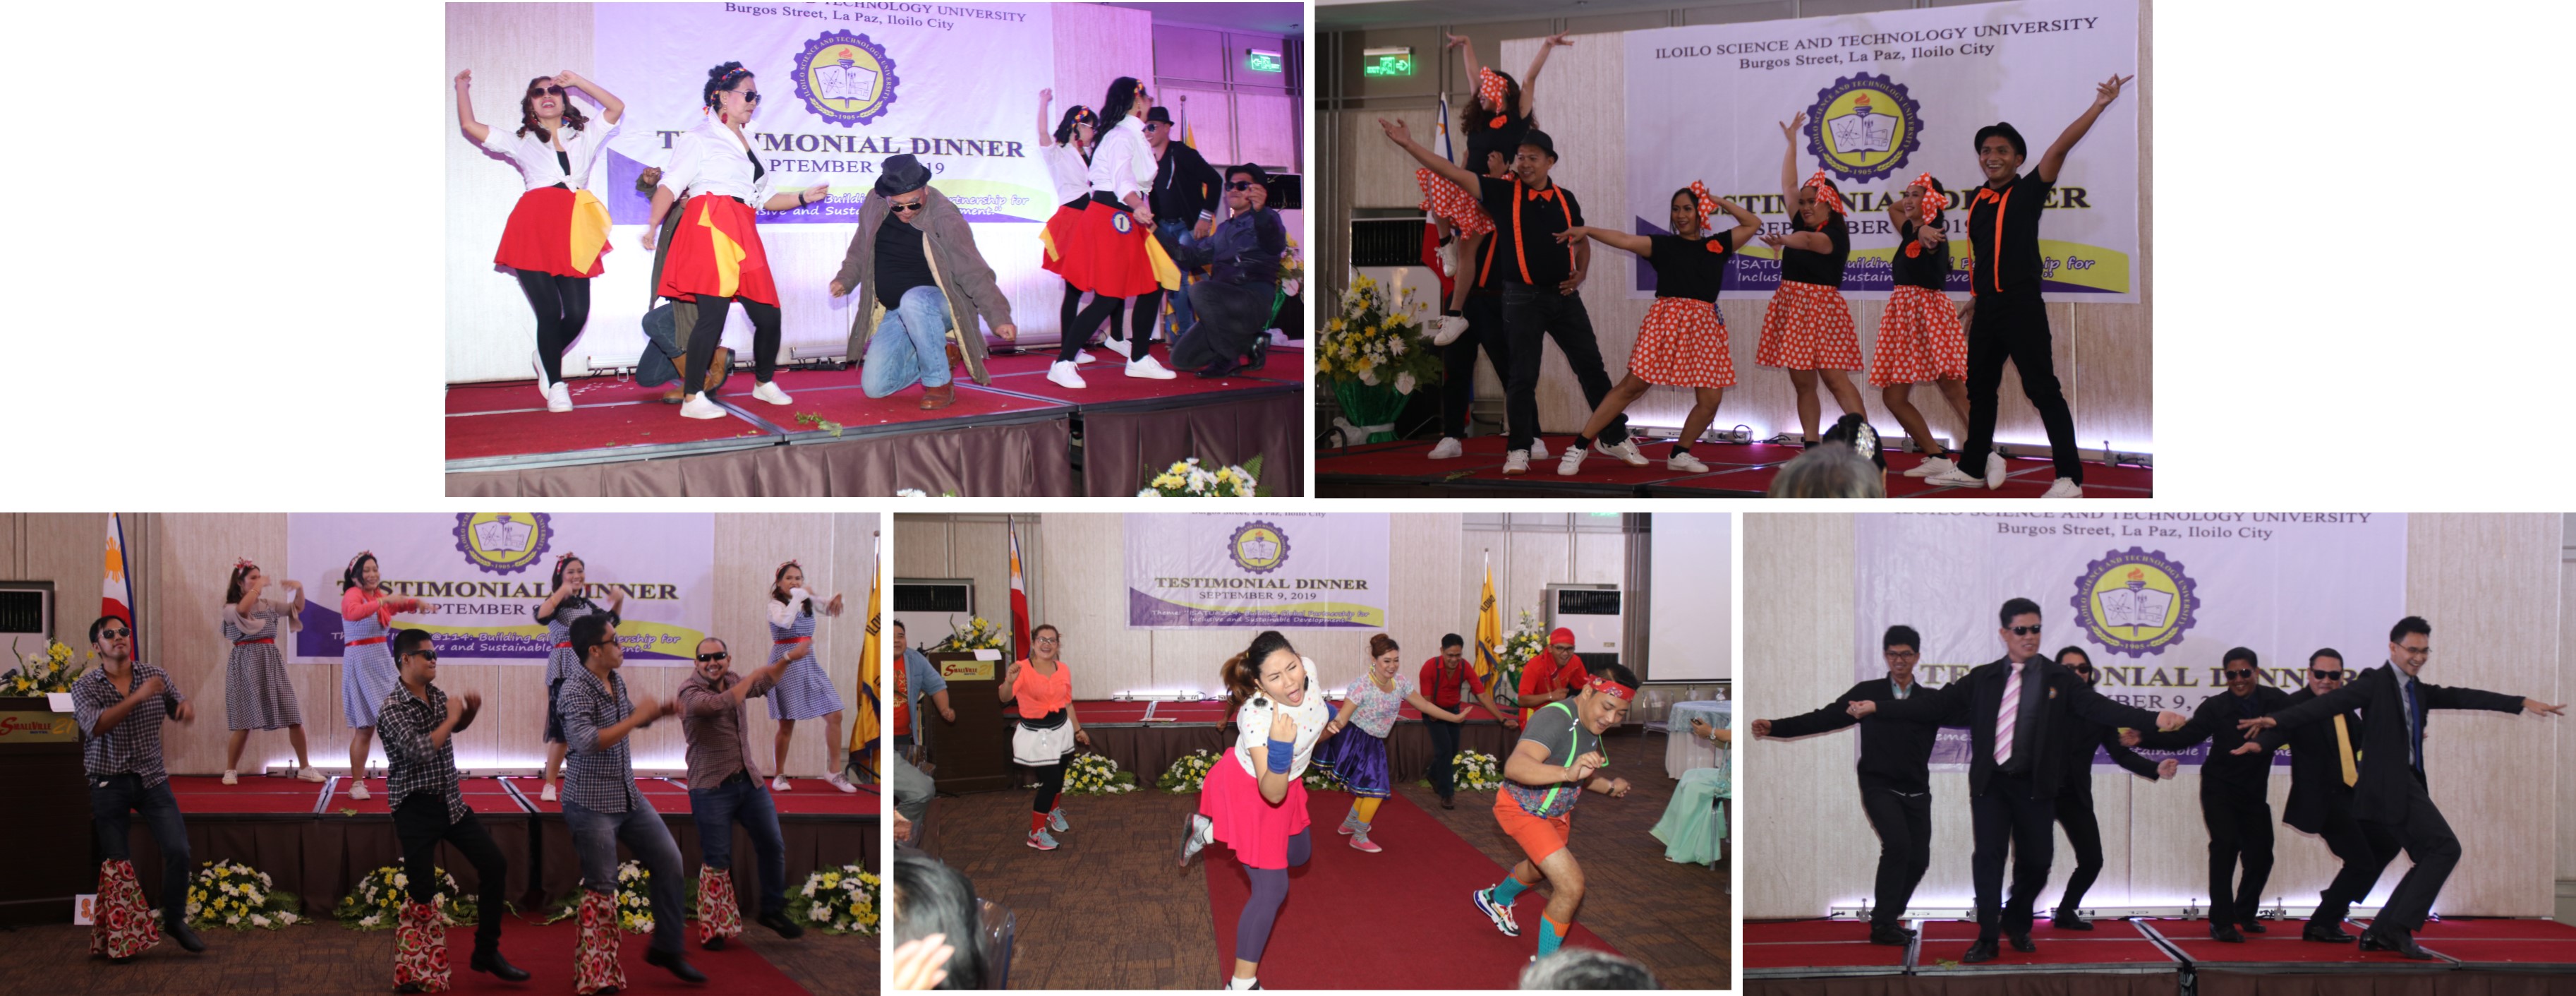 The faculty of the different colleges and the non-teaching personnel compete in the Retro Dance Contest.